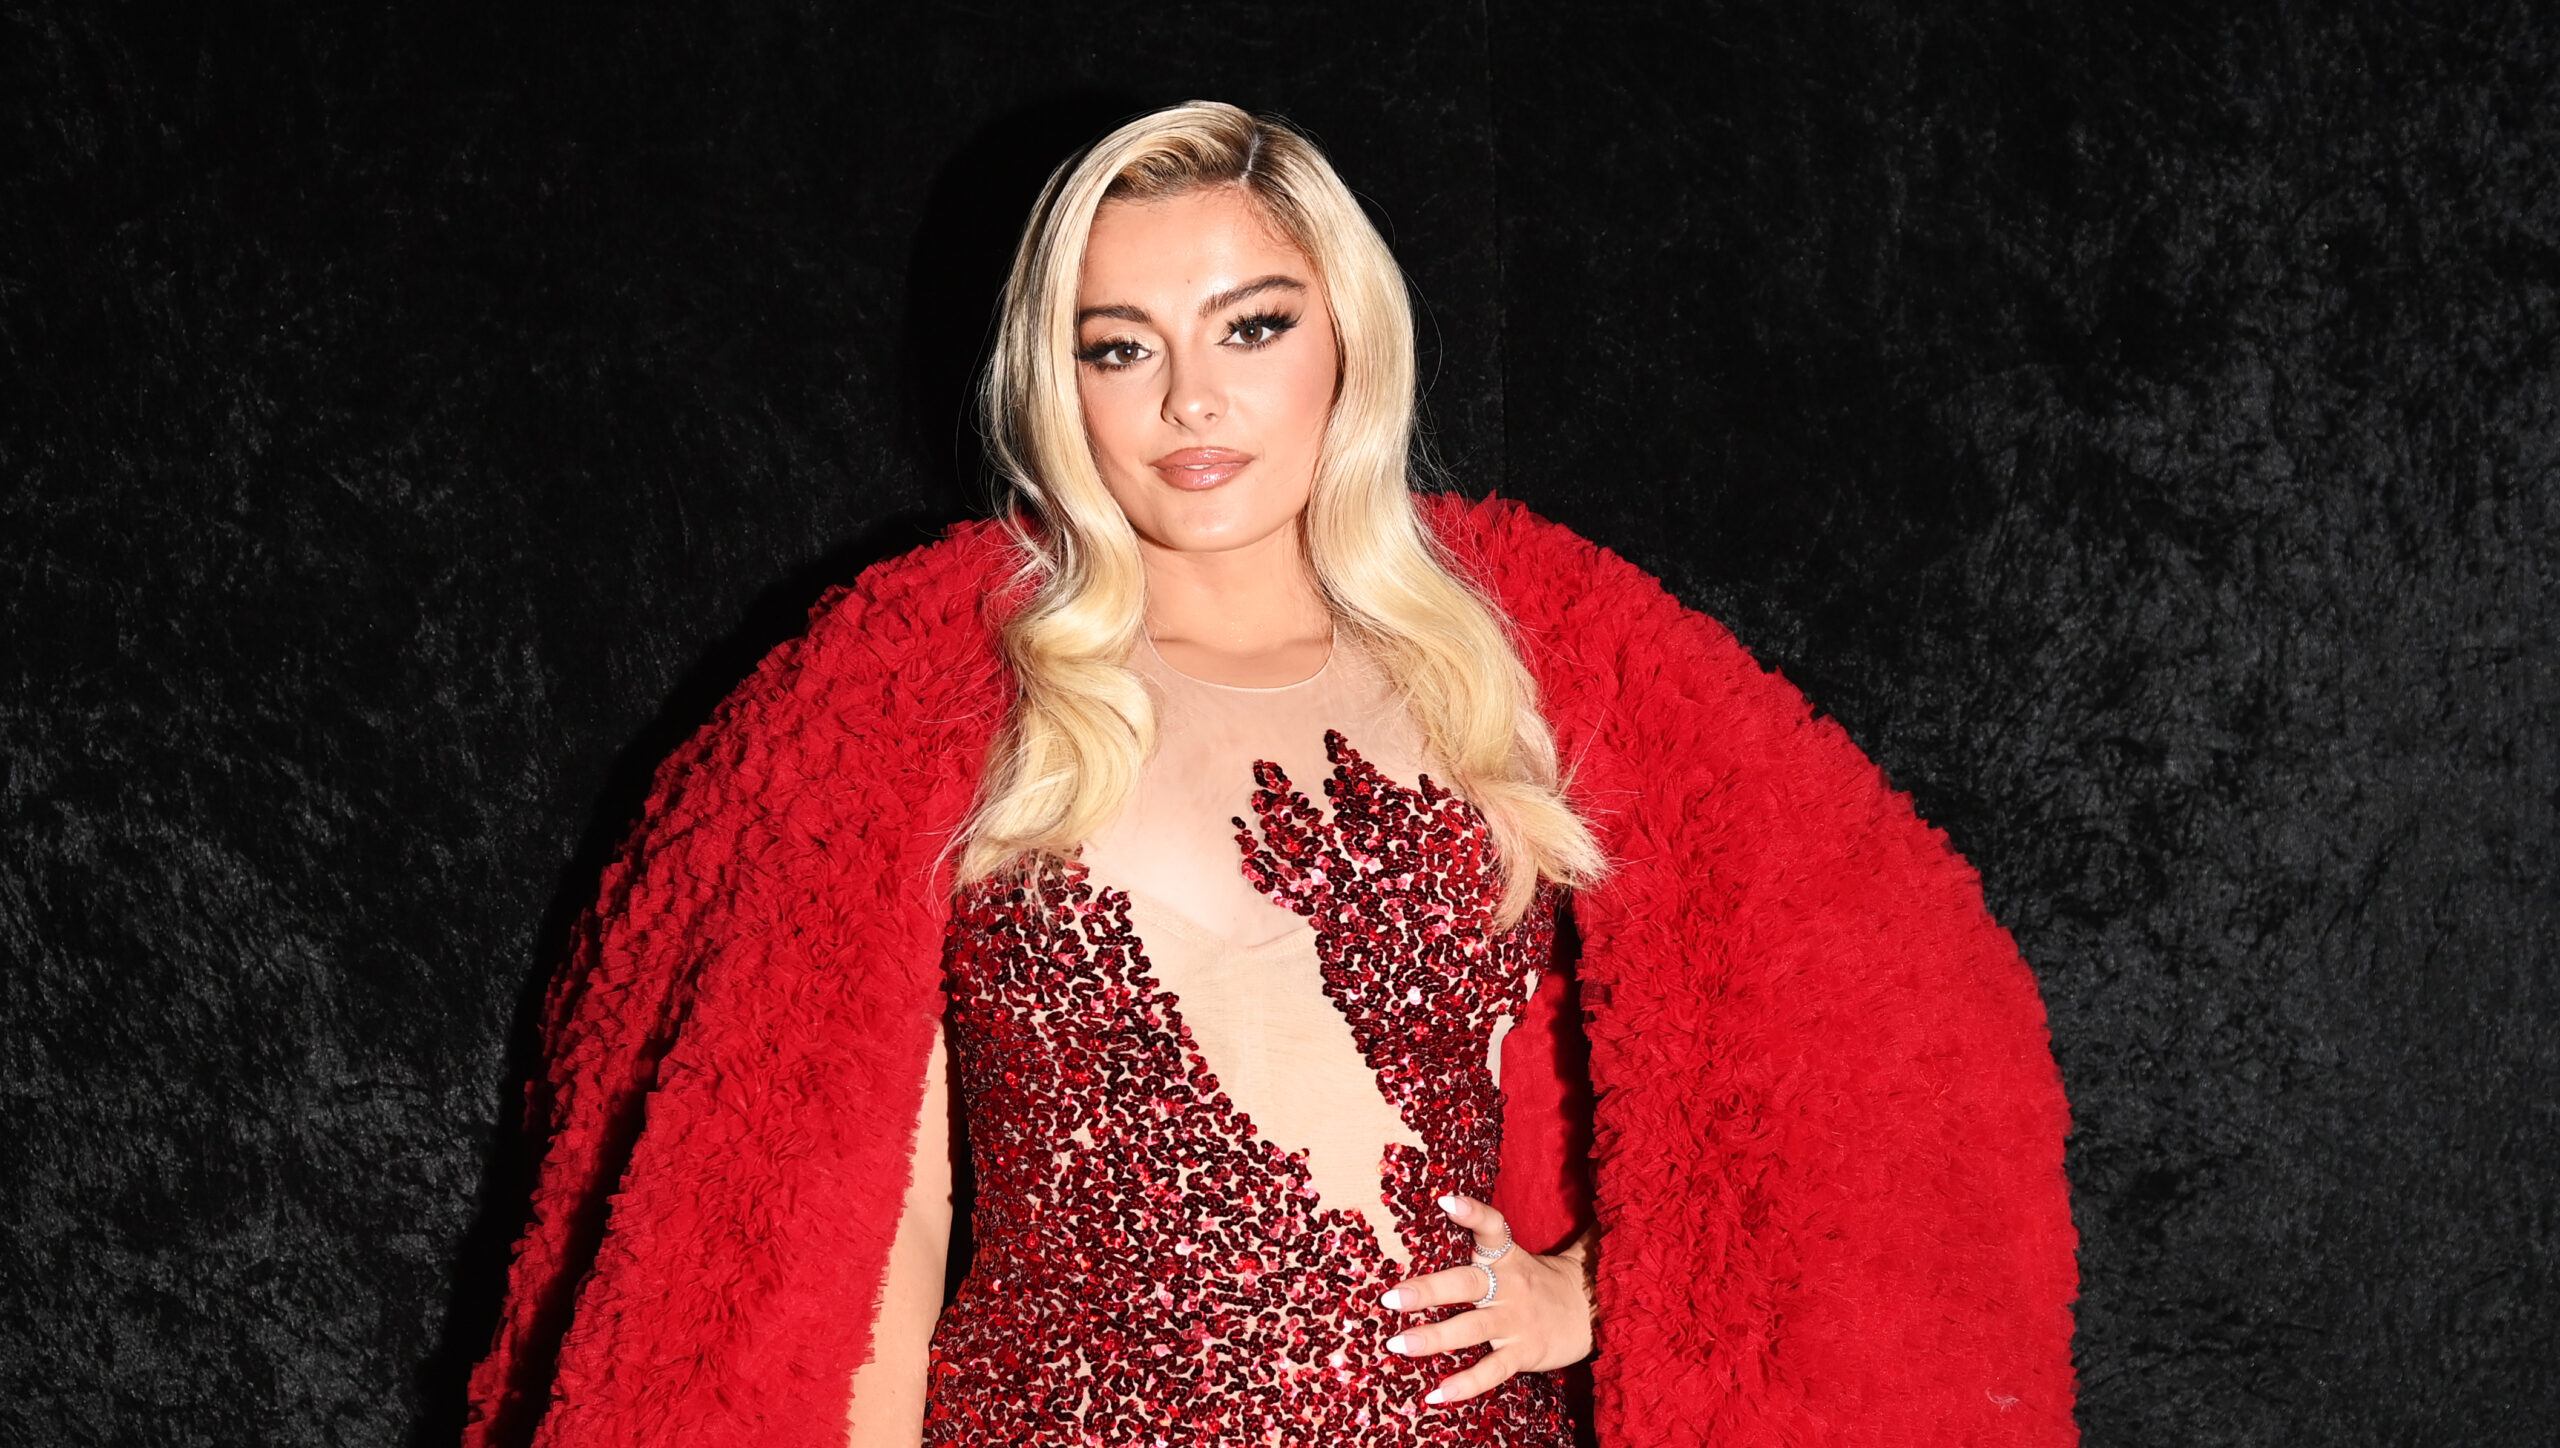 Bebe Rexha shares fan photo after getting hit by phone at concert.